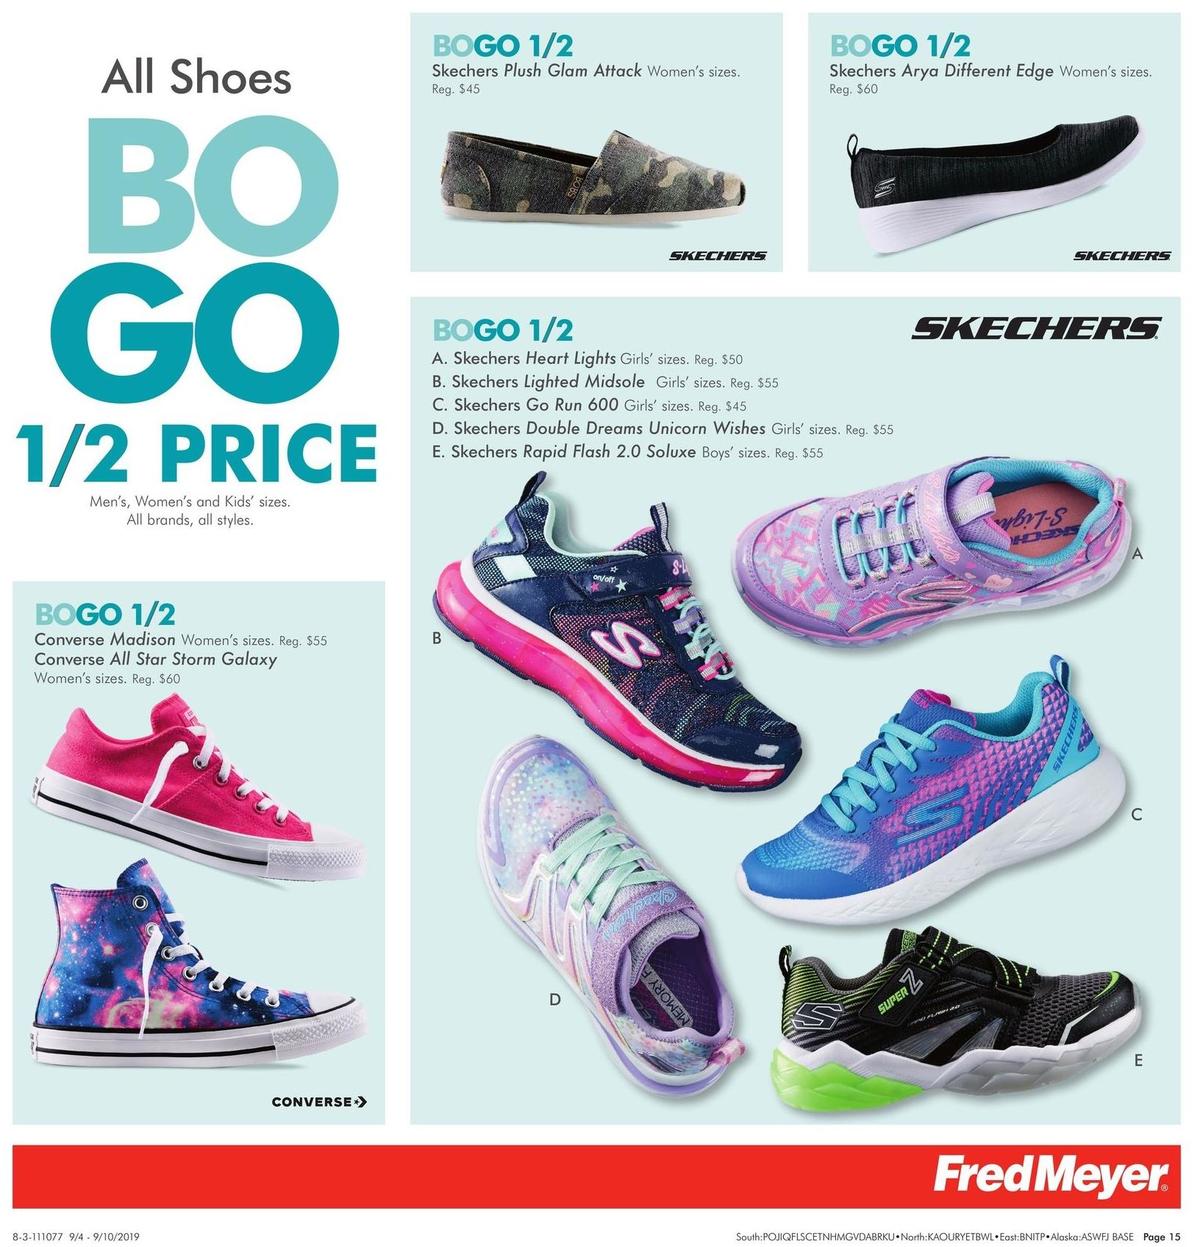 Fred Meyer General Merchandise Weekly Ad from September 4